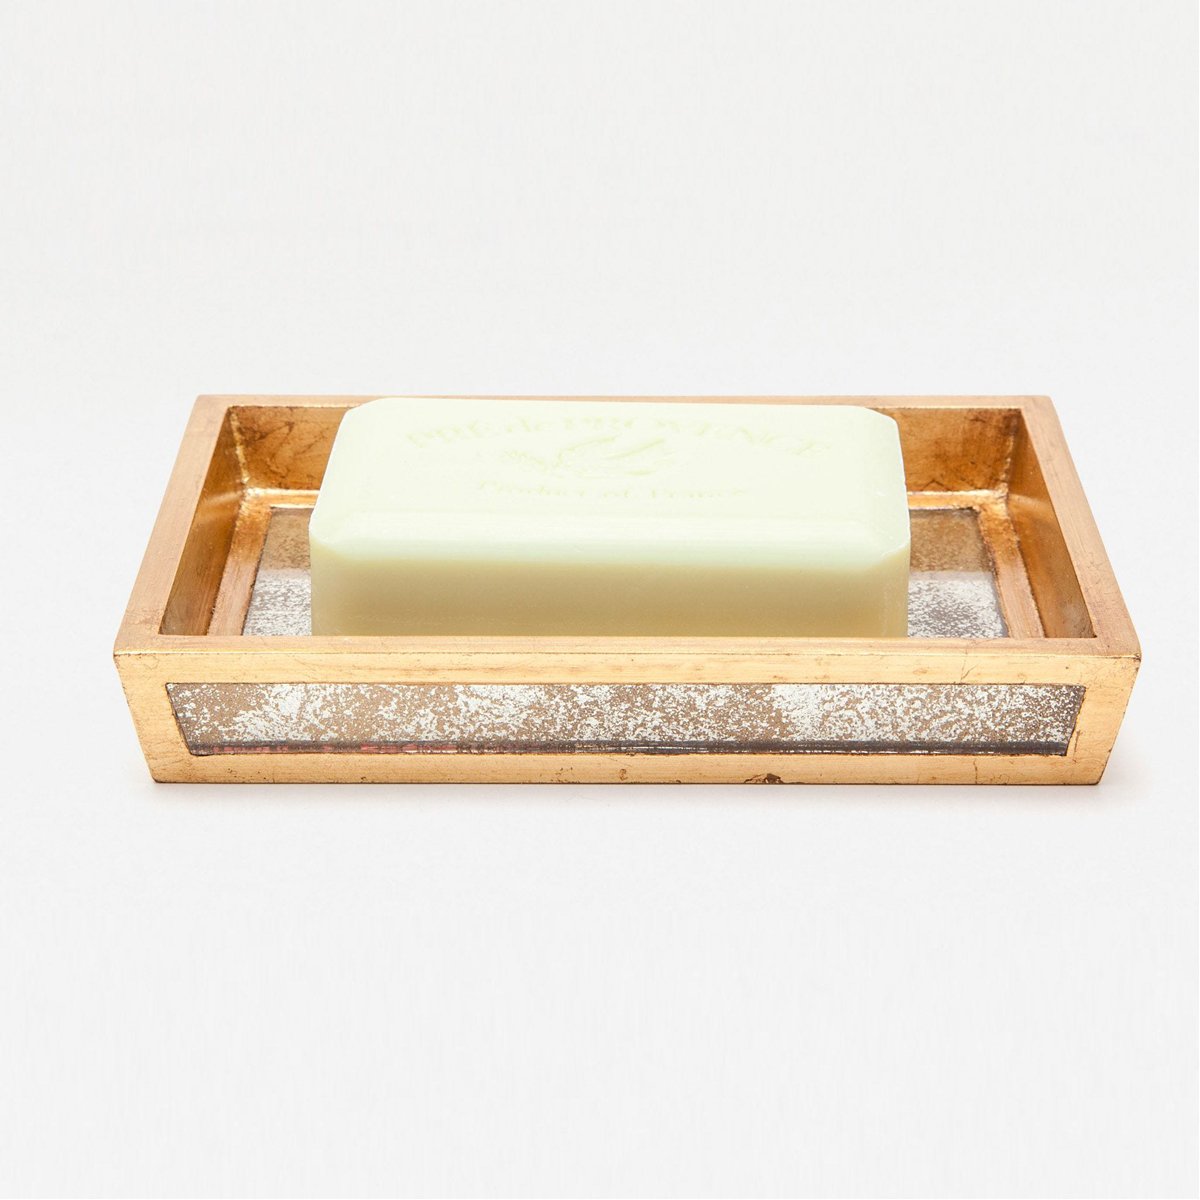 Pigeon and Poodle Atwater Rectangular Soap Dish, Tapered